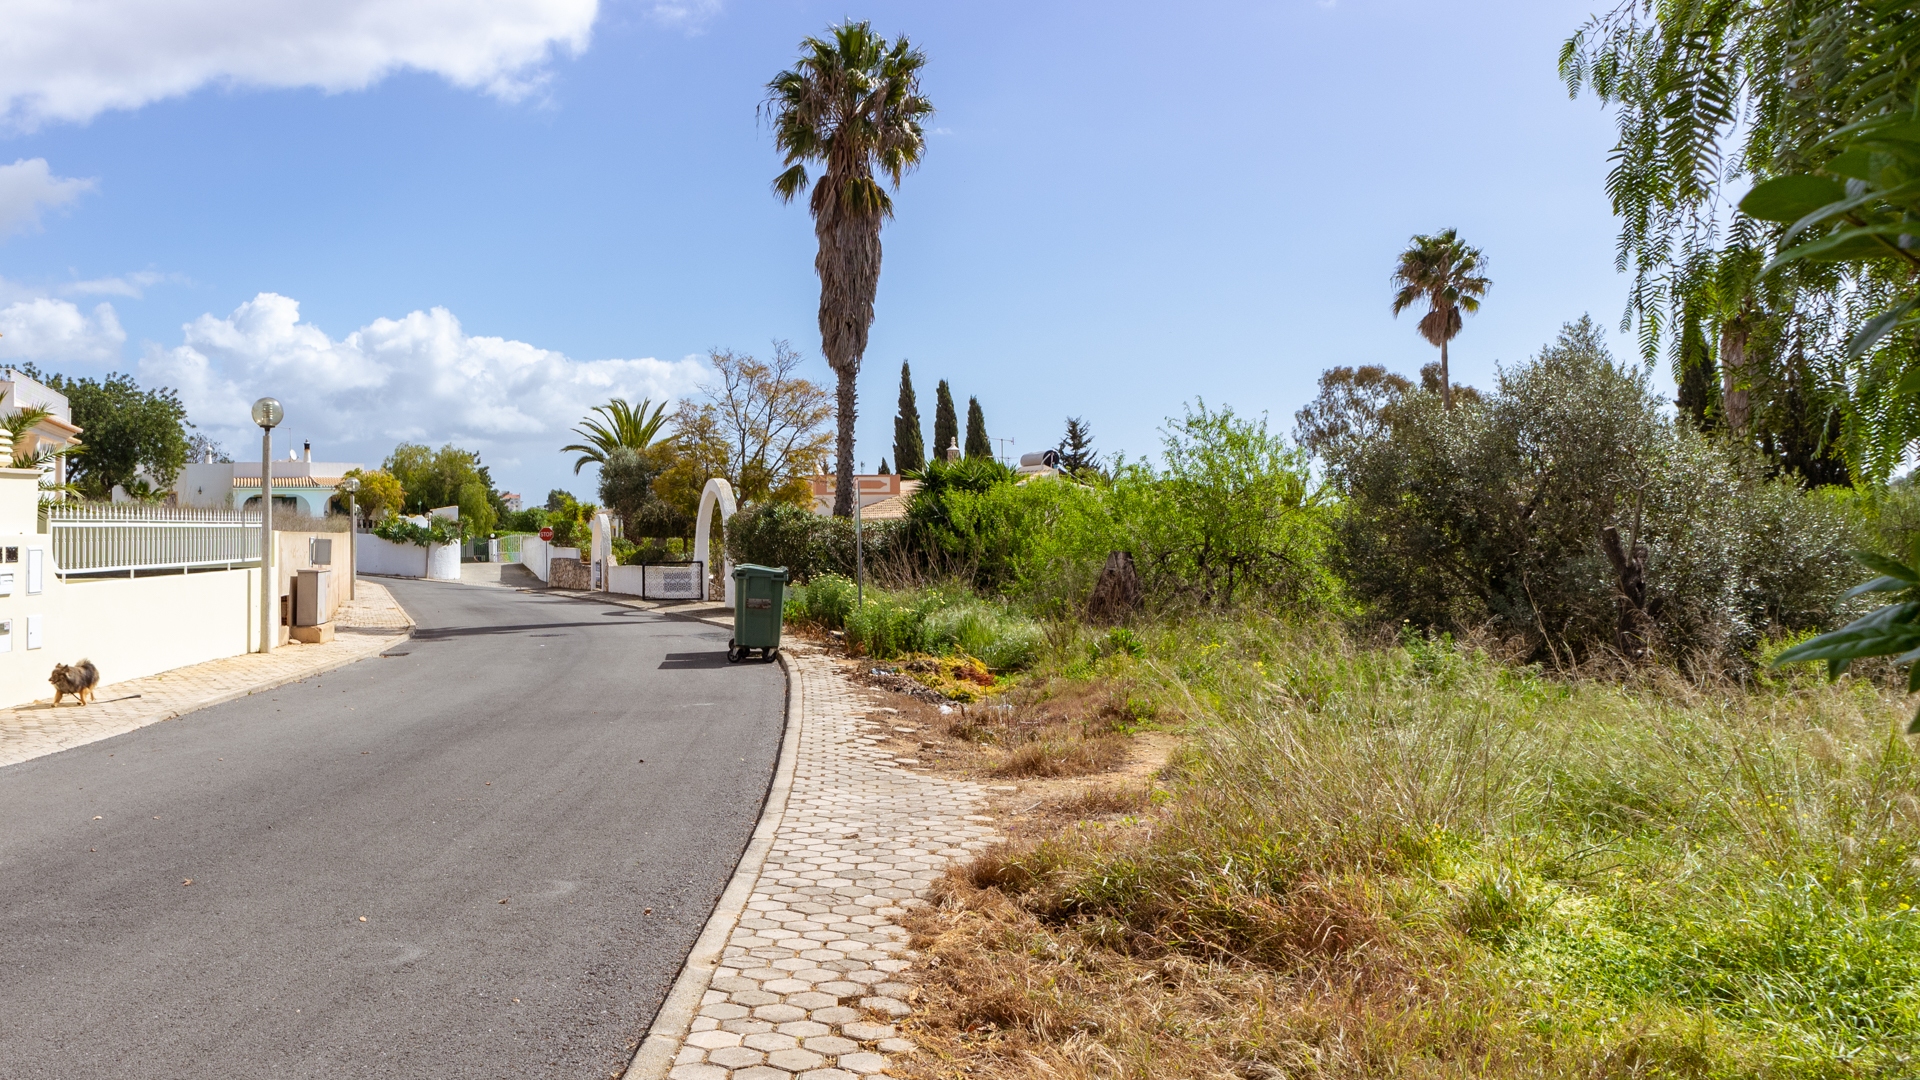 Final plot on exclusive urbanization between Estômbar and Lagoa | LG1387 Plot with permission to build a large villa with pool and garden, located close to all amenities with good access, between Estômbar and Lagoa.